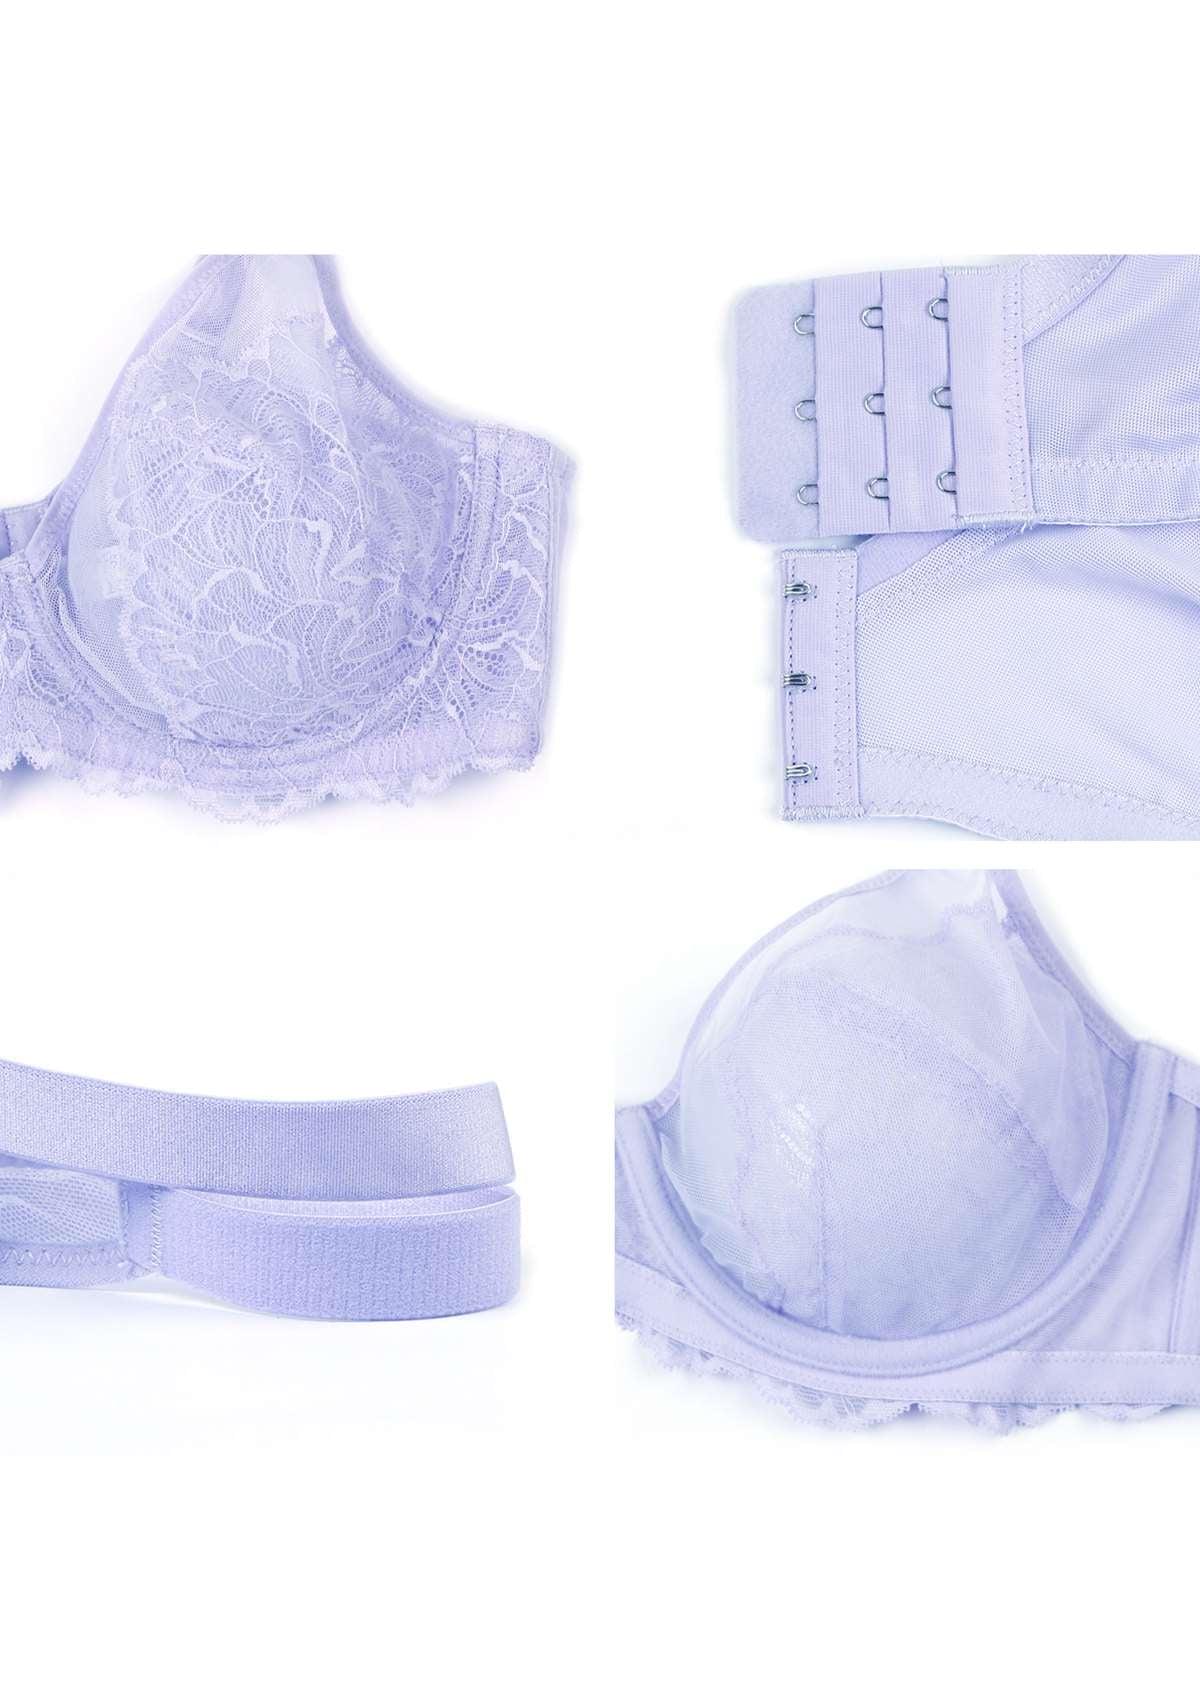 HSIA Blossom Transparent Lace Bra: Plus Size Wired Back Smoothing Bra - Light Purple / 38 / DDD/F